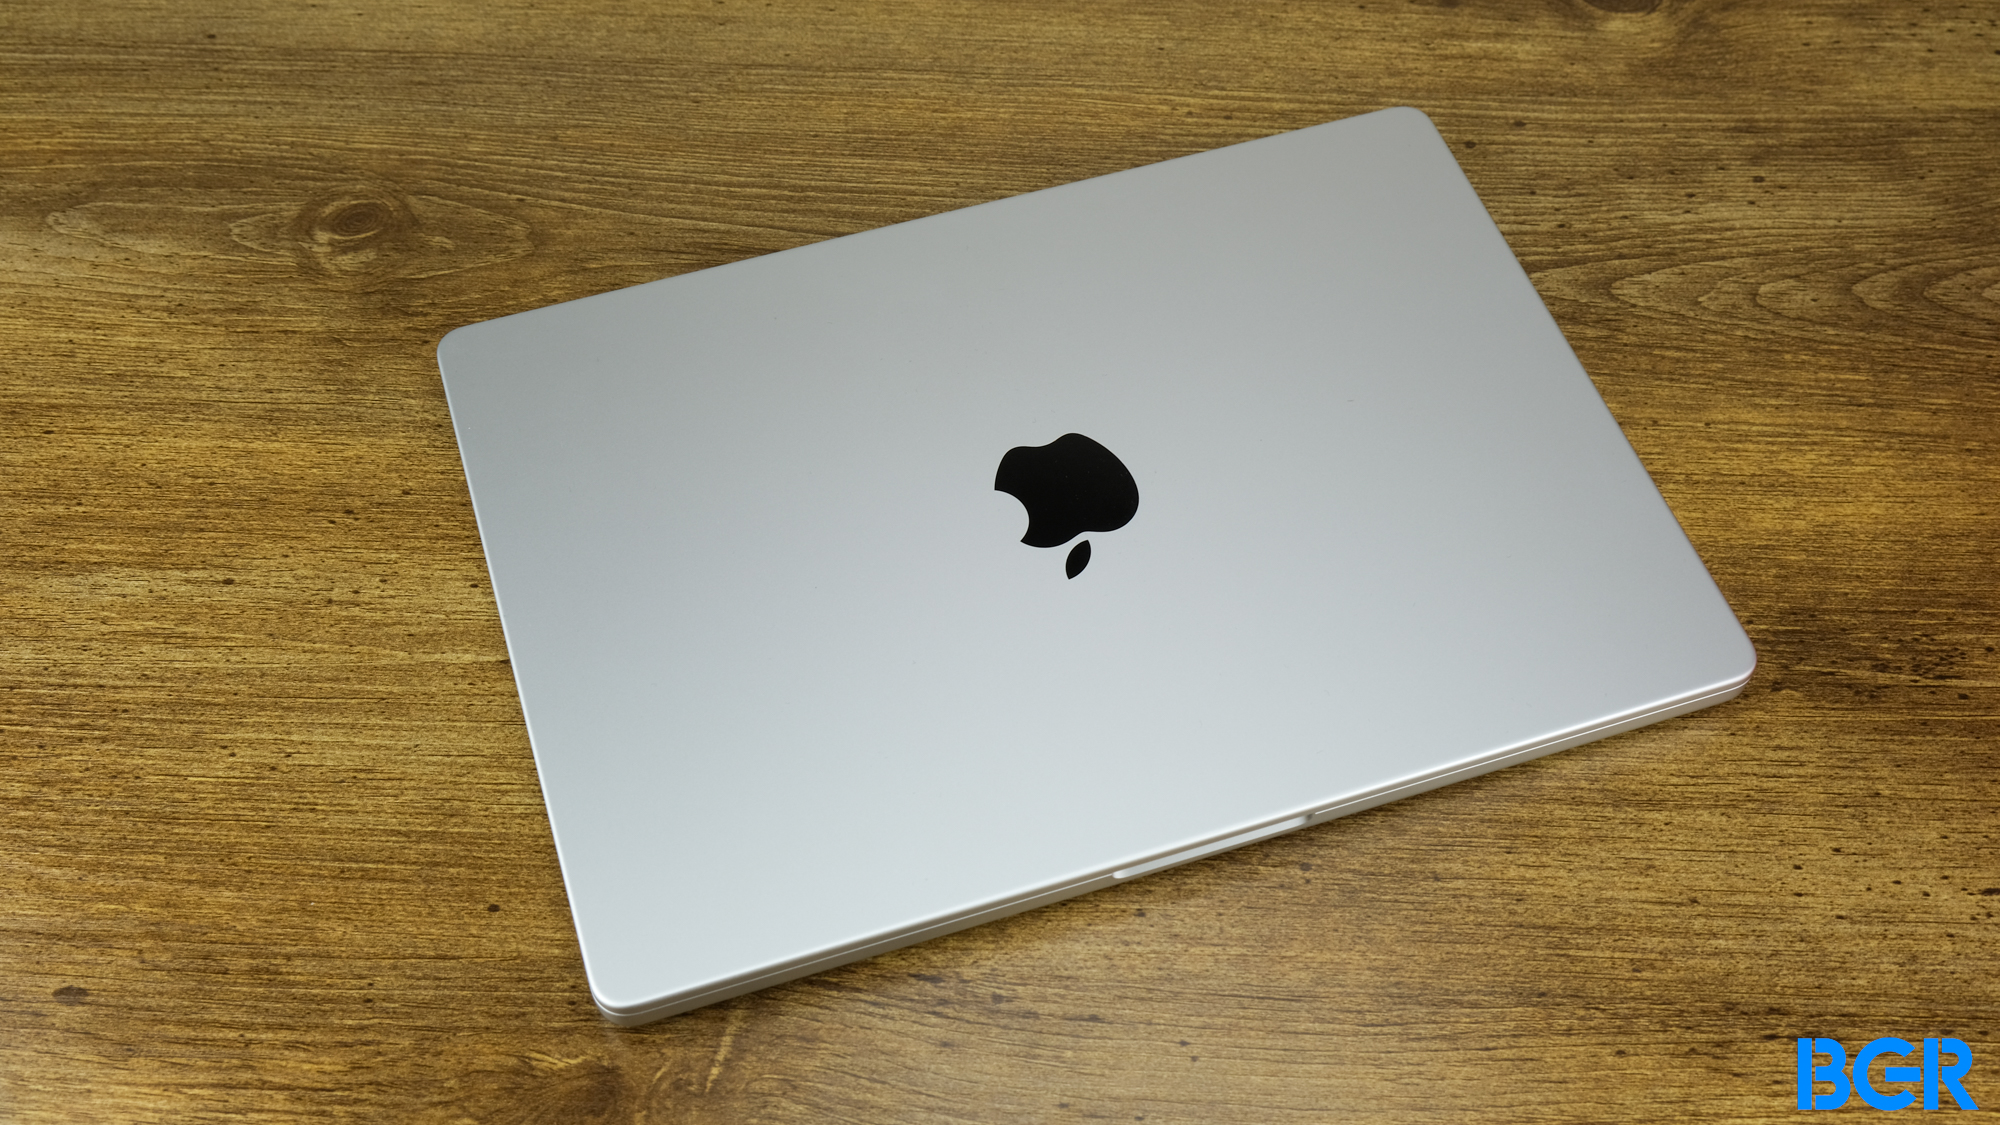 Apple could launch a lowcost MacBook in 2024 to compete with